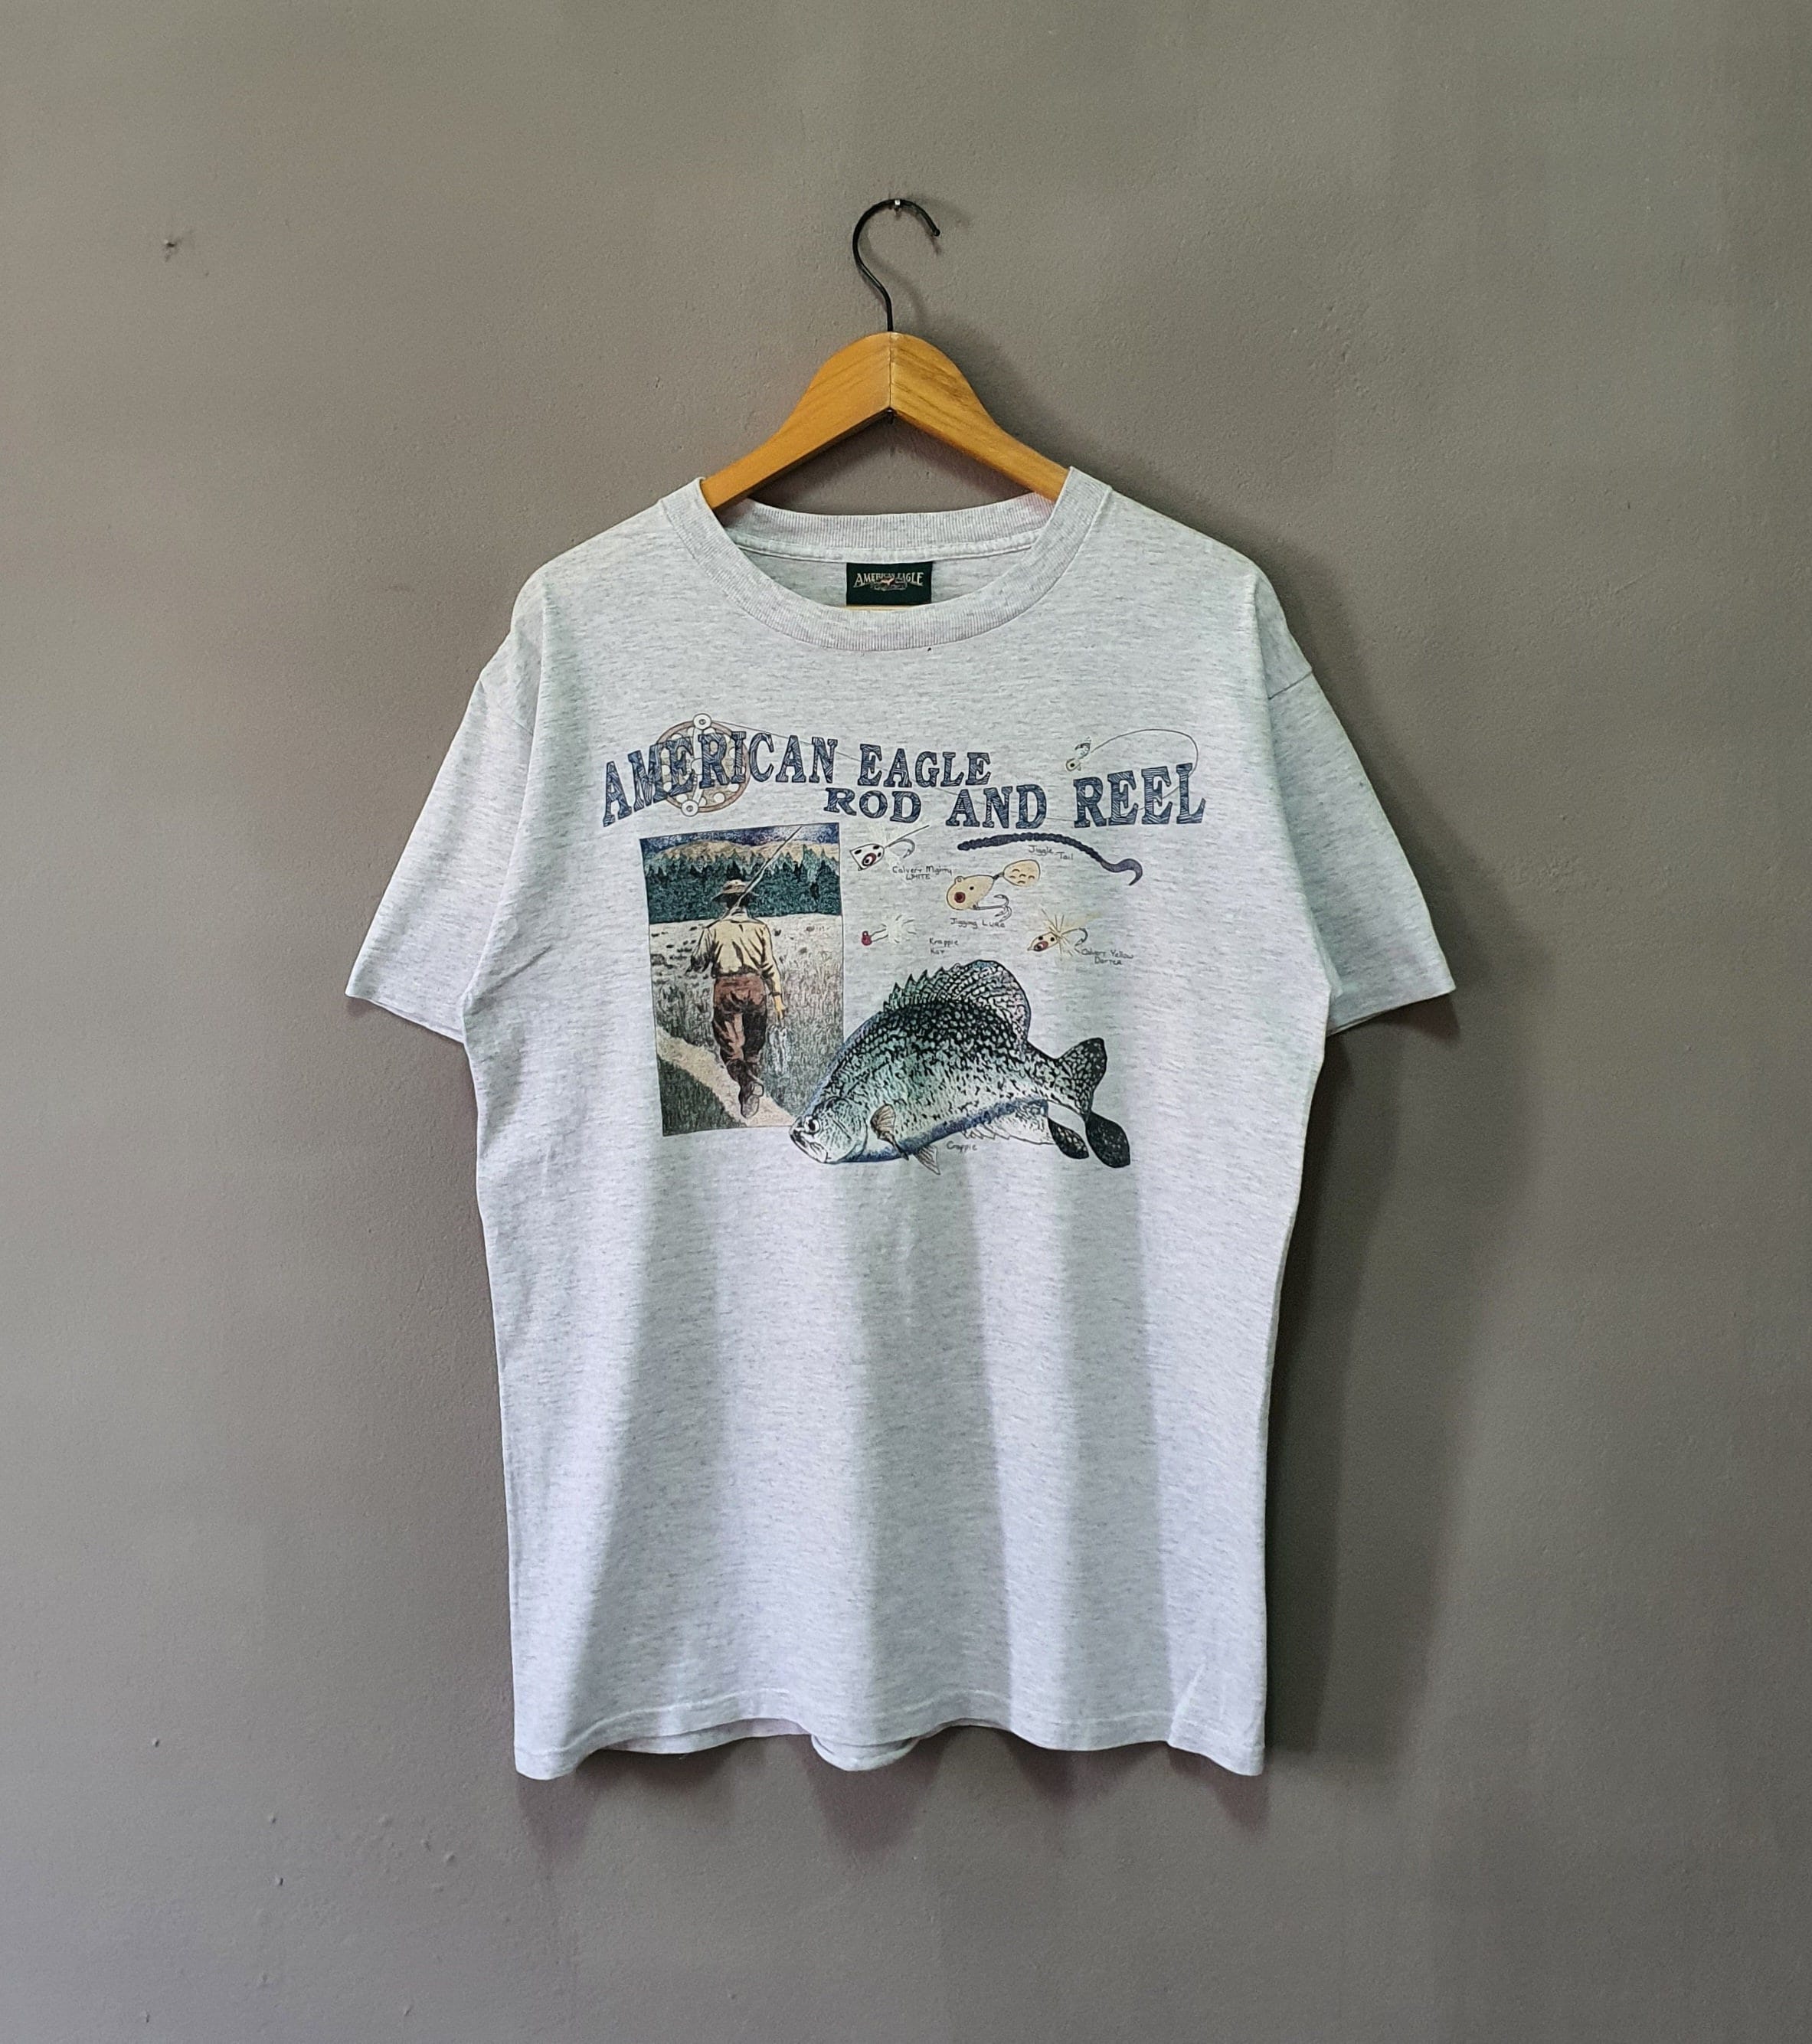 Vintage 90s American Eagle Rod and Reel Crappies T Shirt Size L